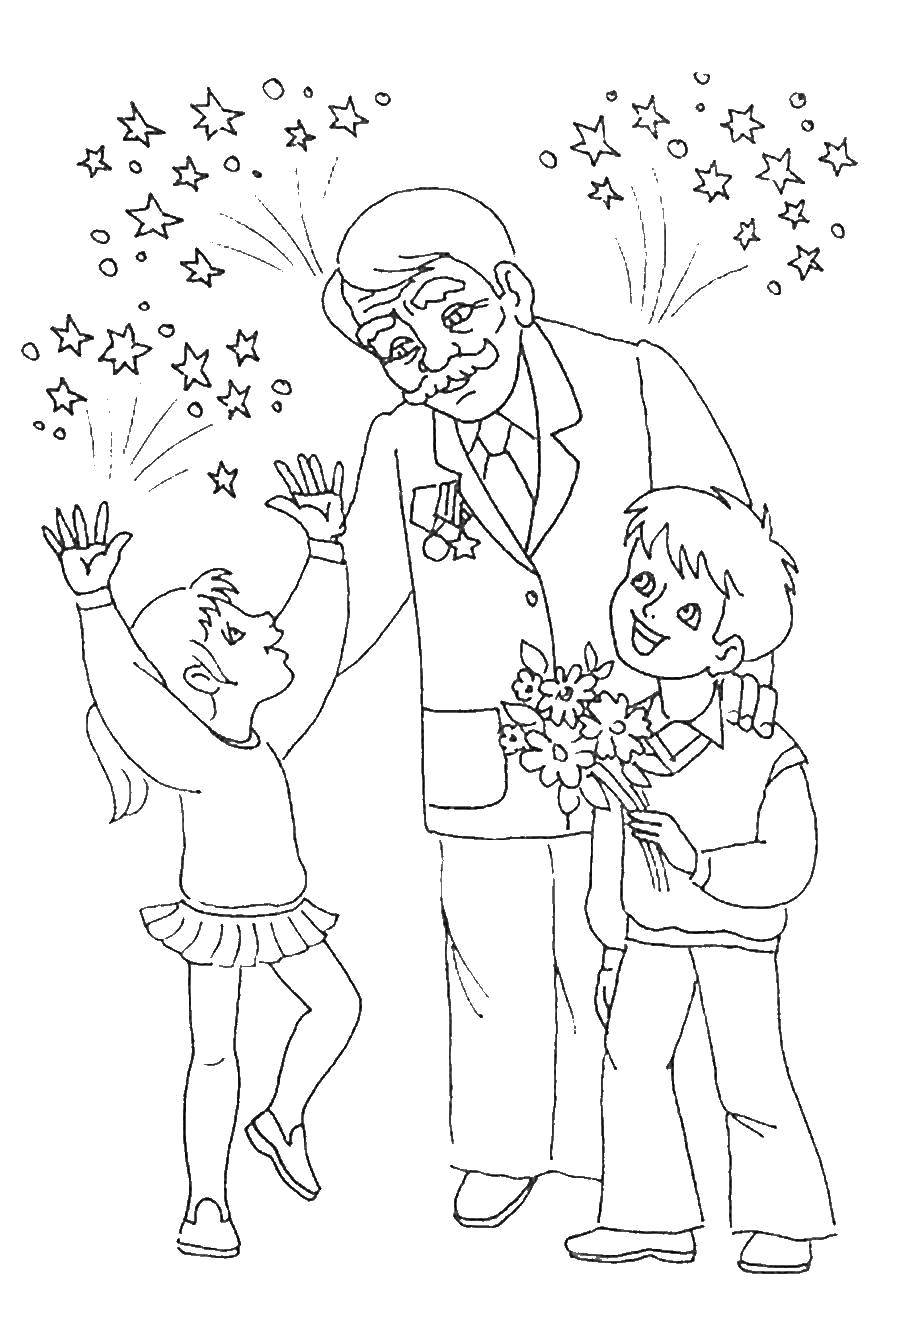 Coloring Congratulations grandpa on victory day. Category greetings. Tags:  Greeting, may 9, Victory Day.